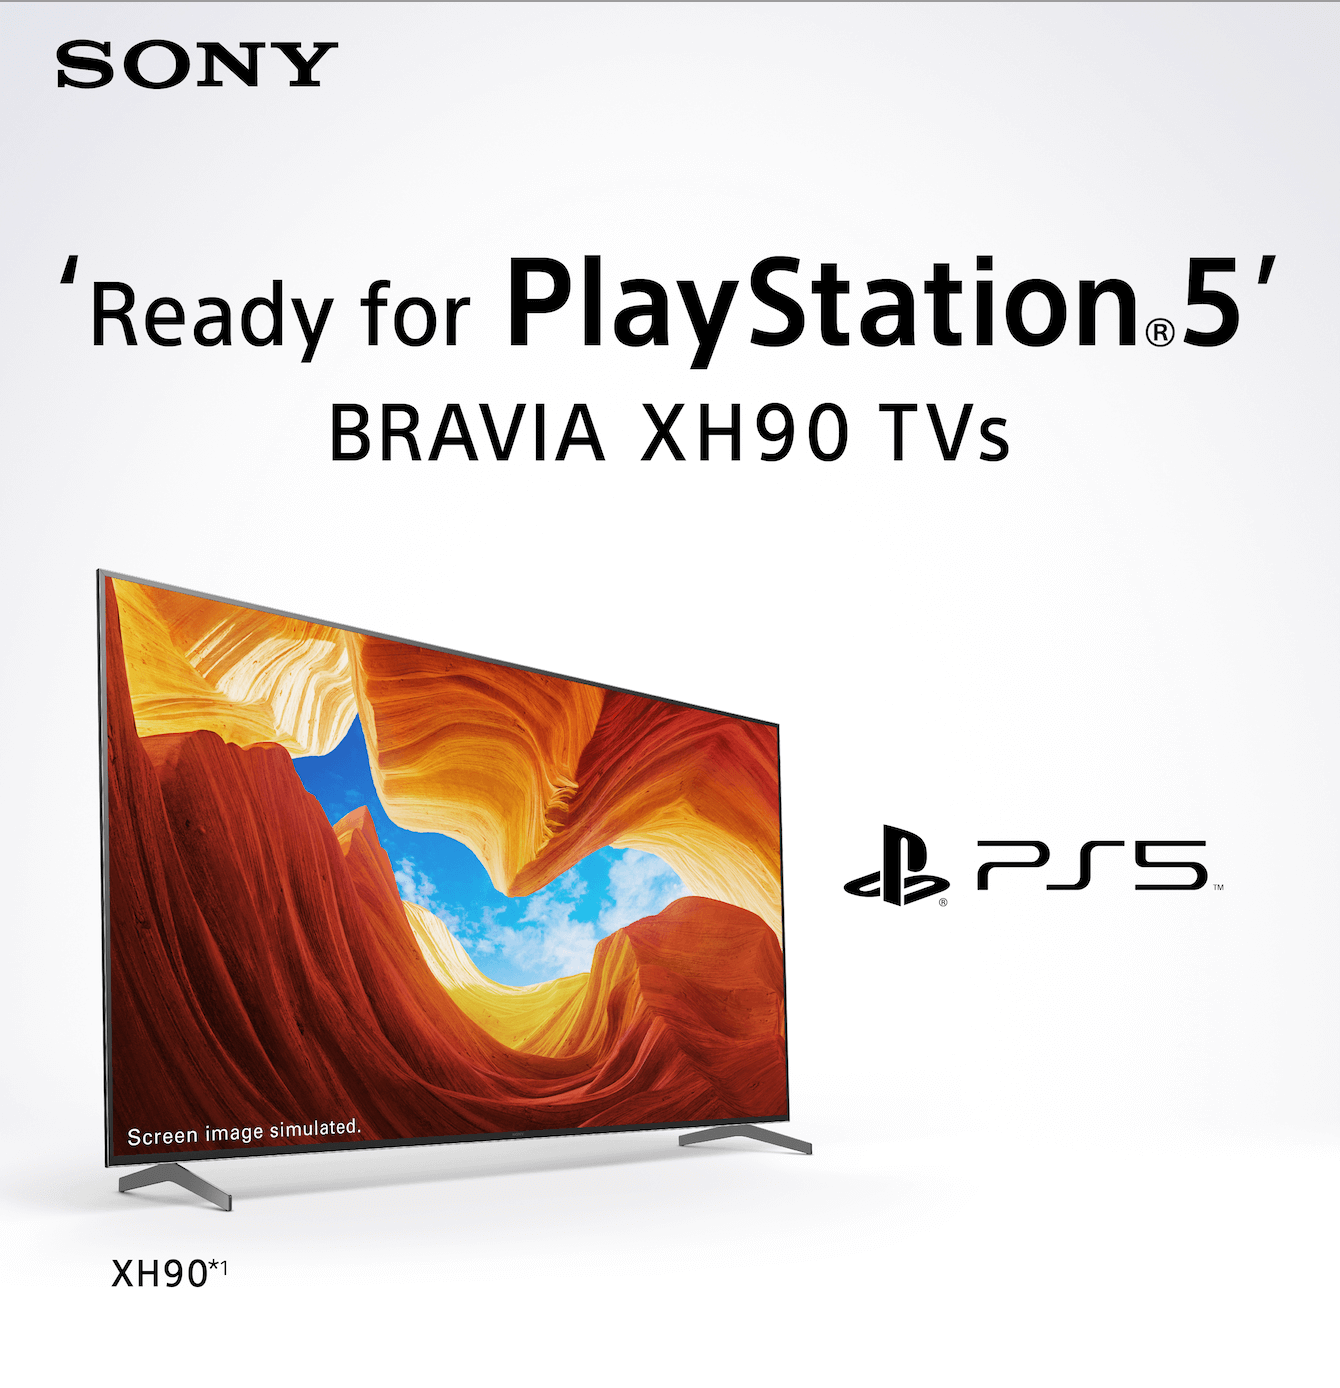 Ready for PlayStation 5